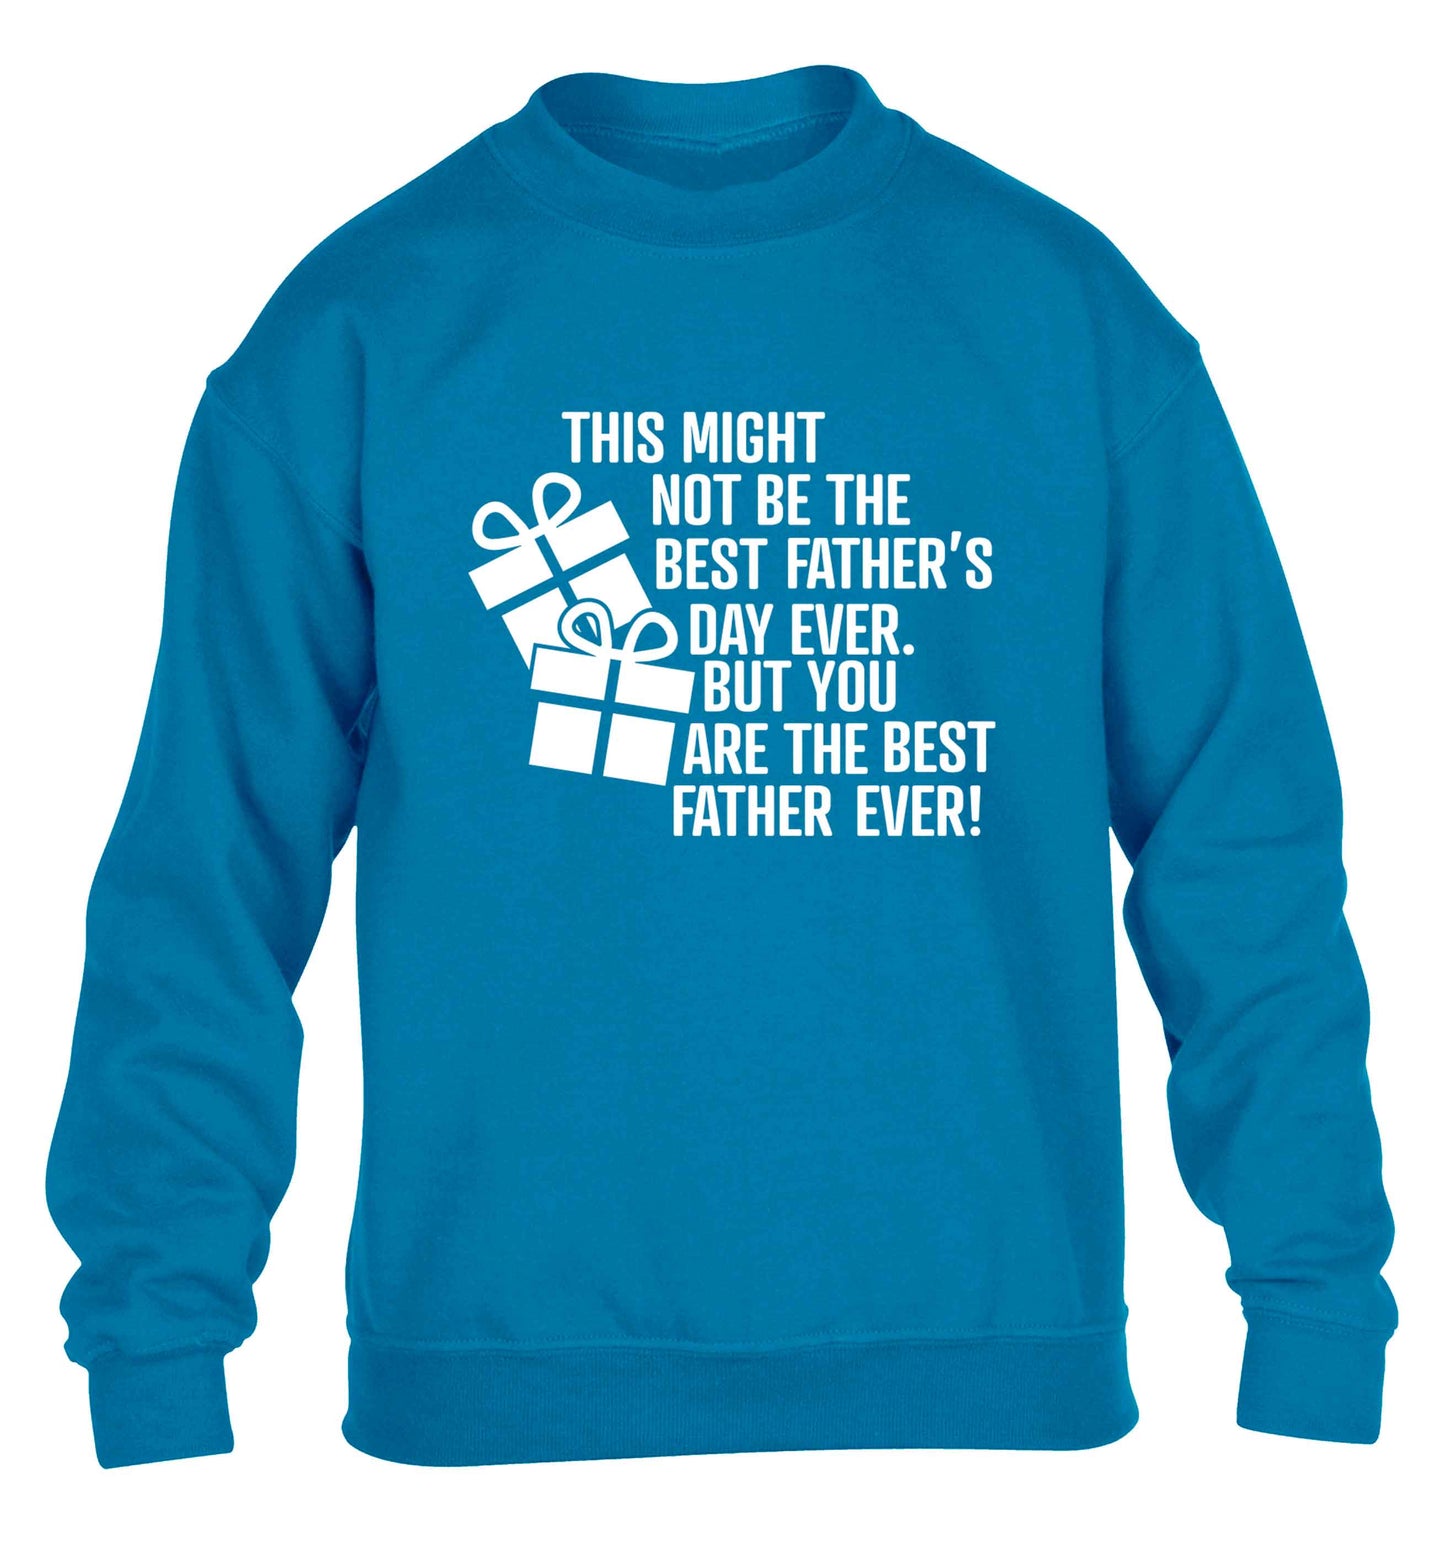 It might not be the best Father's Day ever but you are the best father ever! children's blue sweater 12-13 Years